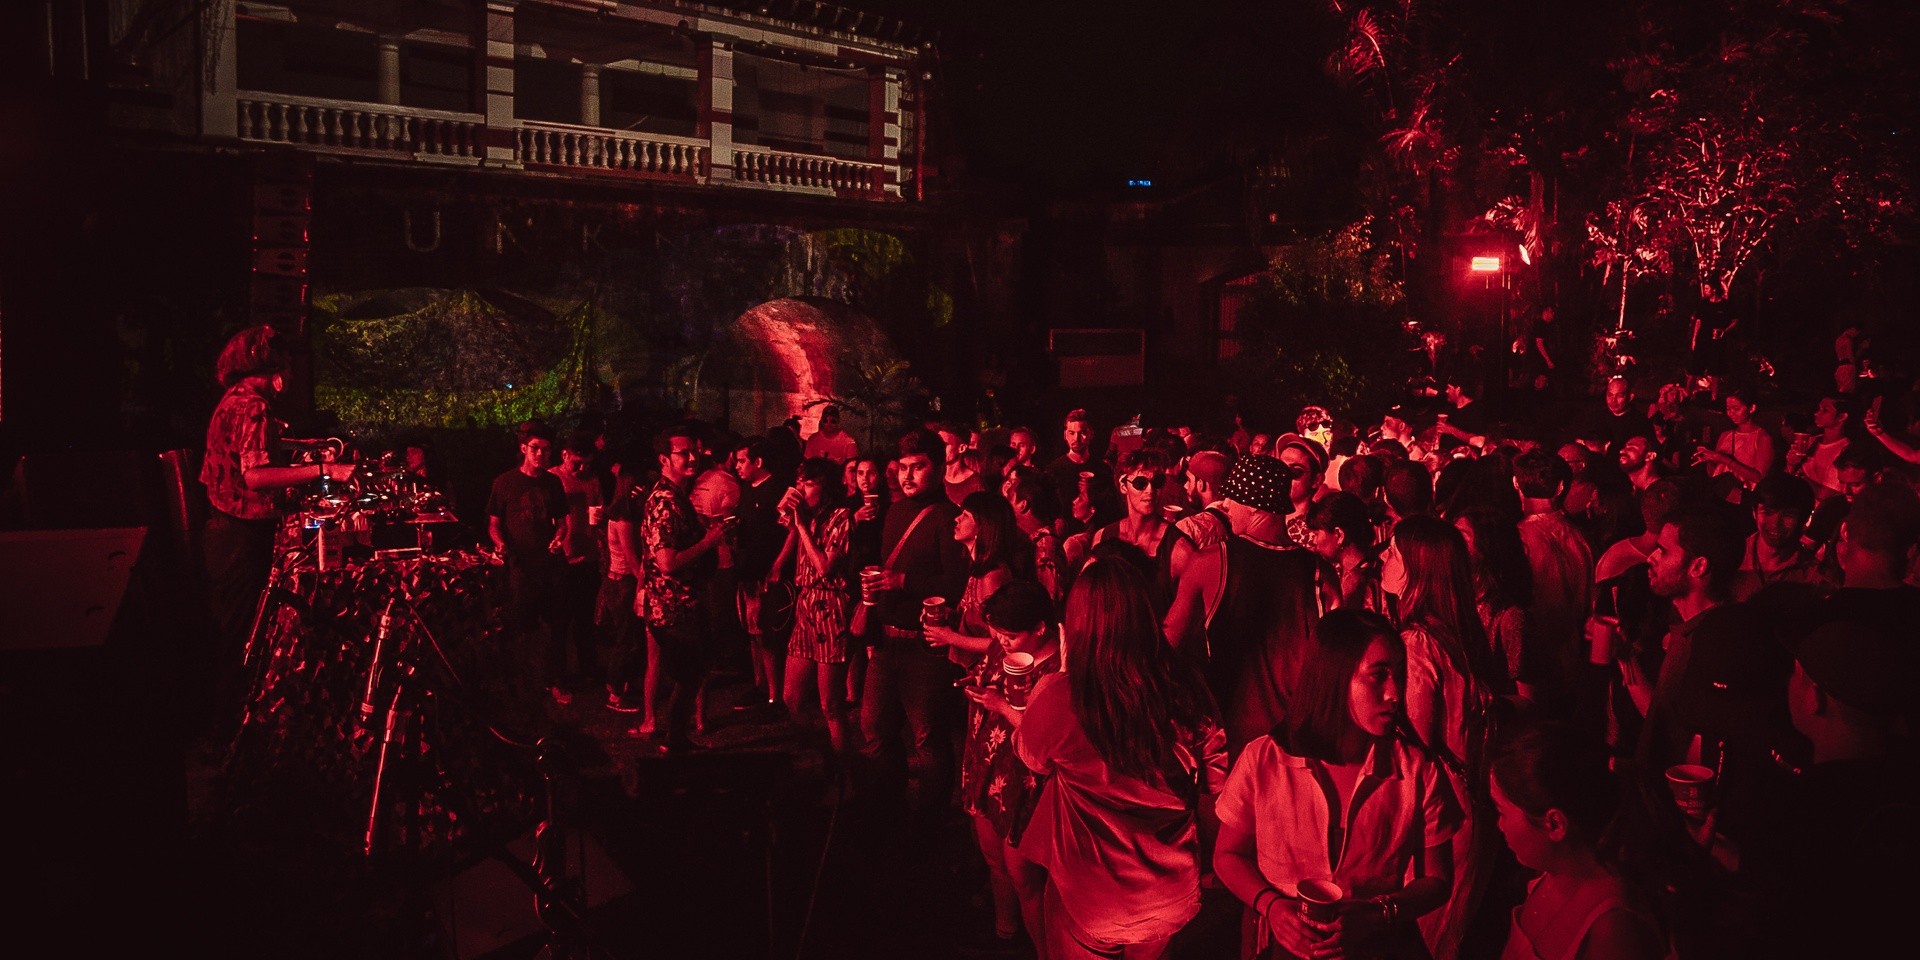 Make Manila dance again: UNKNWN turns 3 with Crazy P’s Jim Baron, C’est Qui, and more – photo gallery